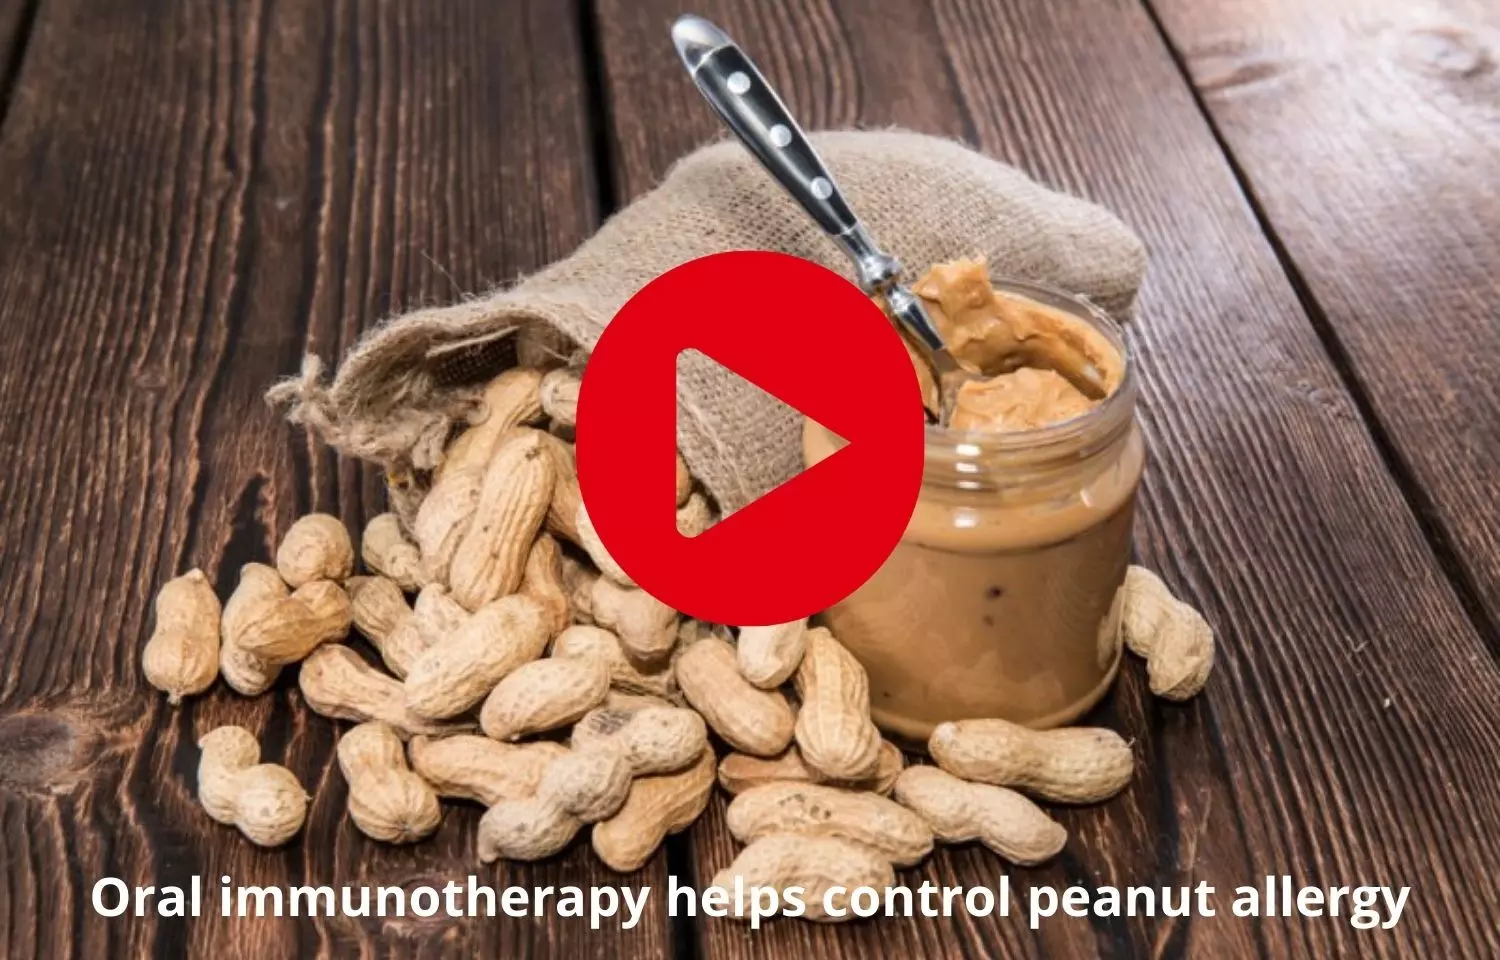 Oral immunotherapy effective in controlling peanut allergy